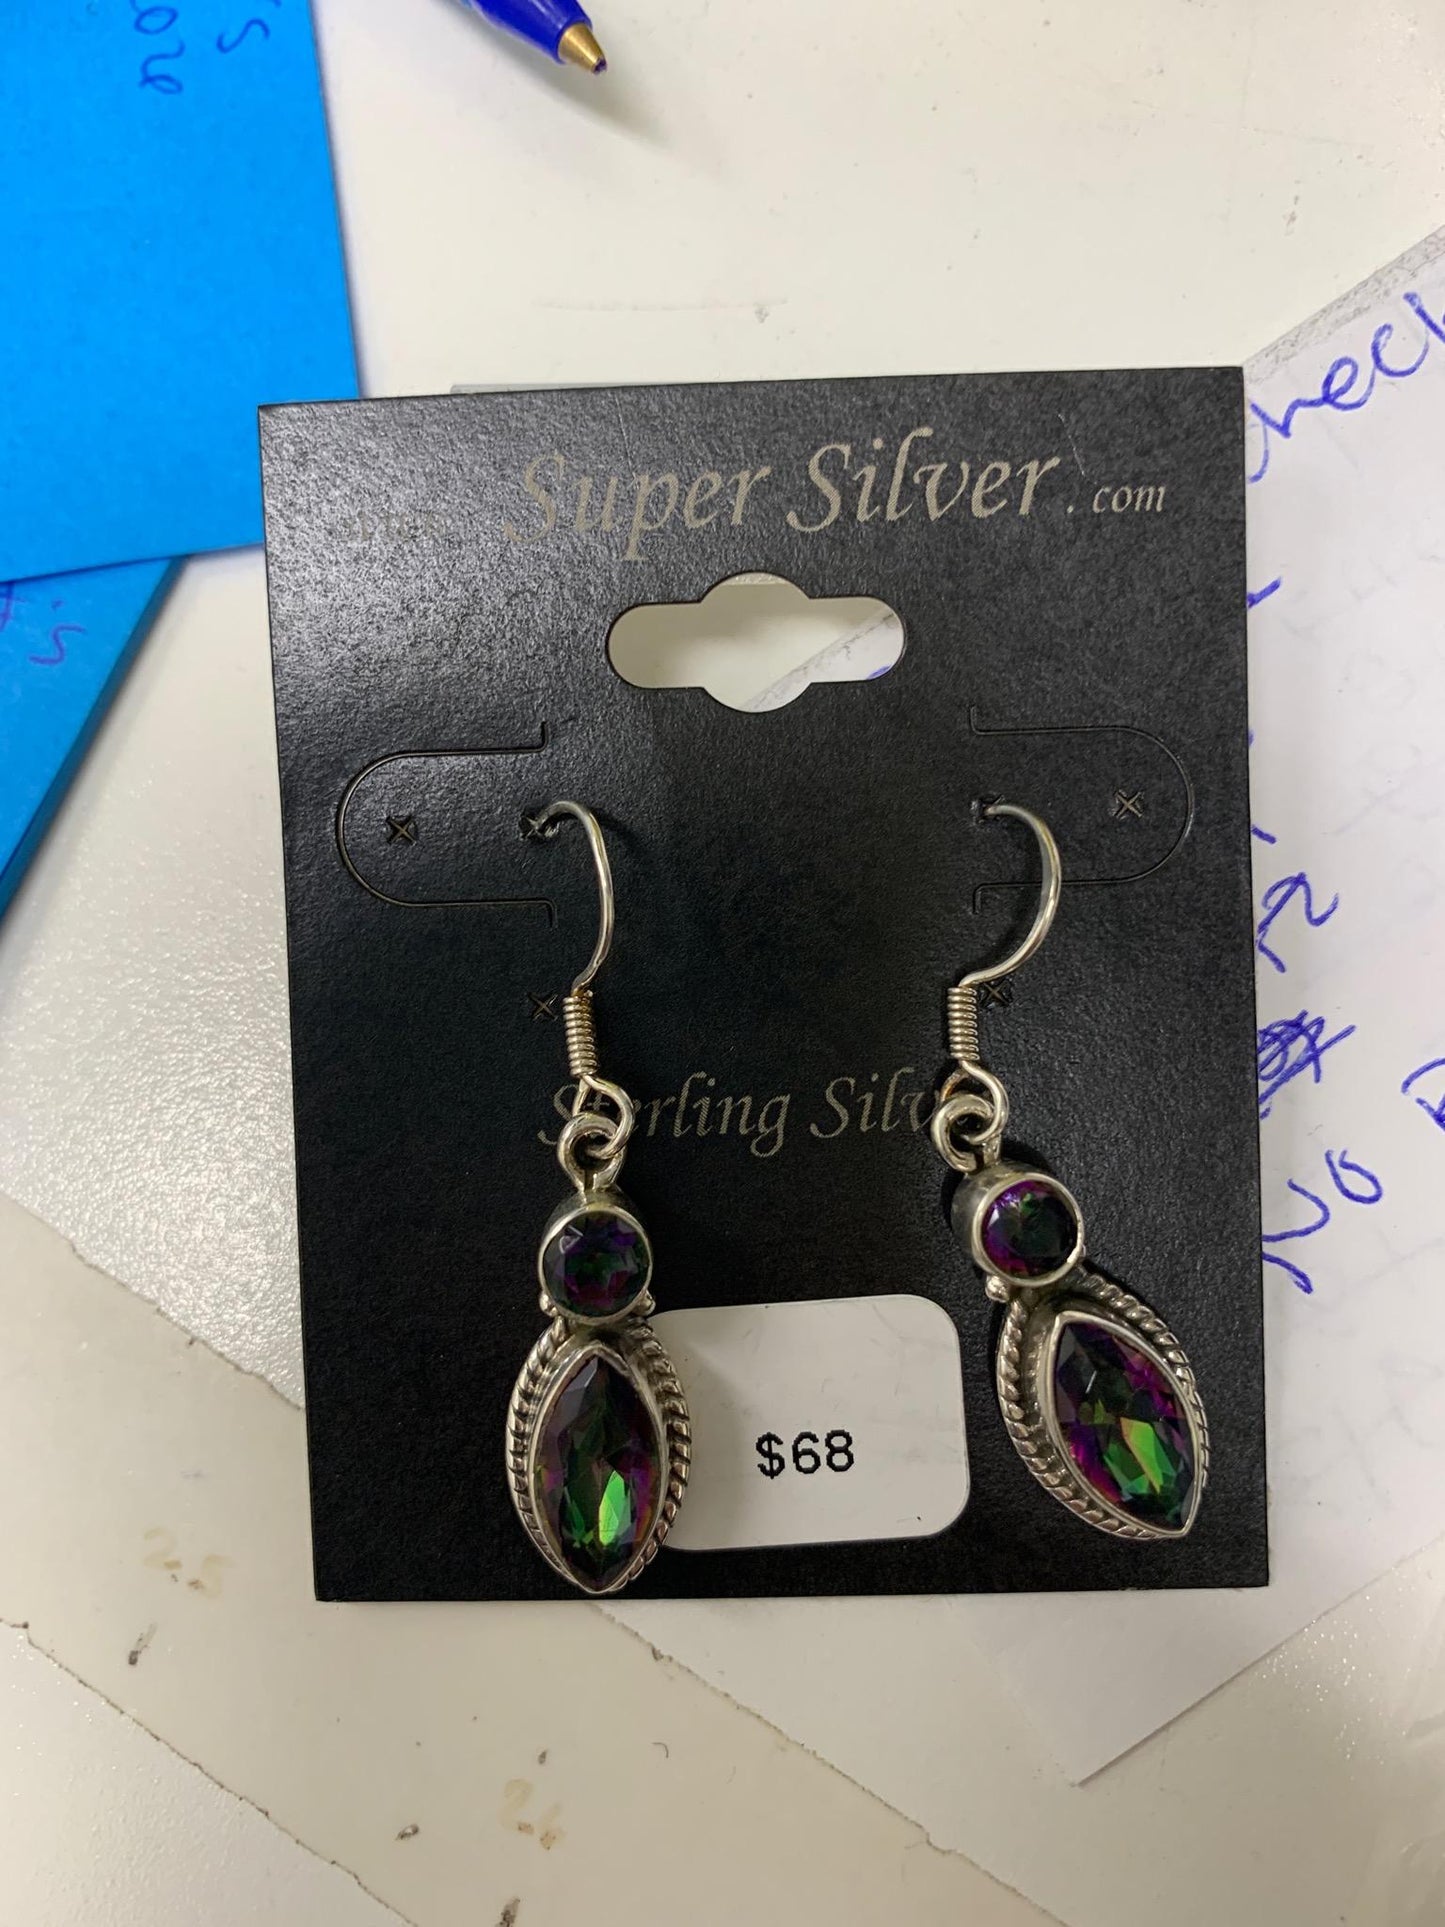 A pair of Super Silver Mystic topaz earrings for Special order with green and purple stones.